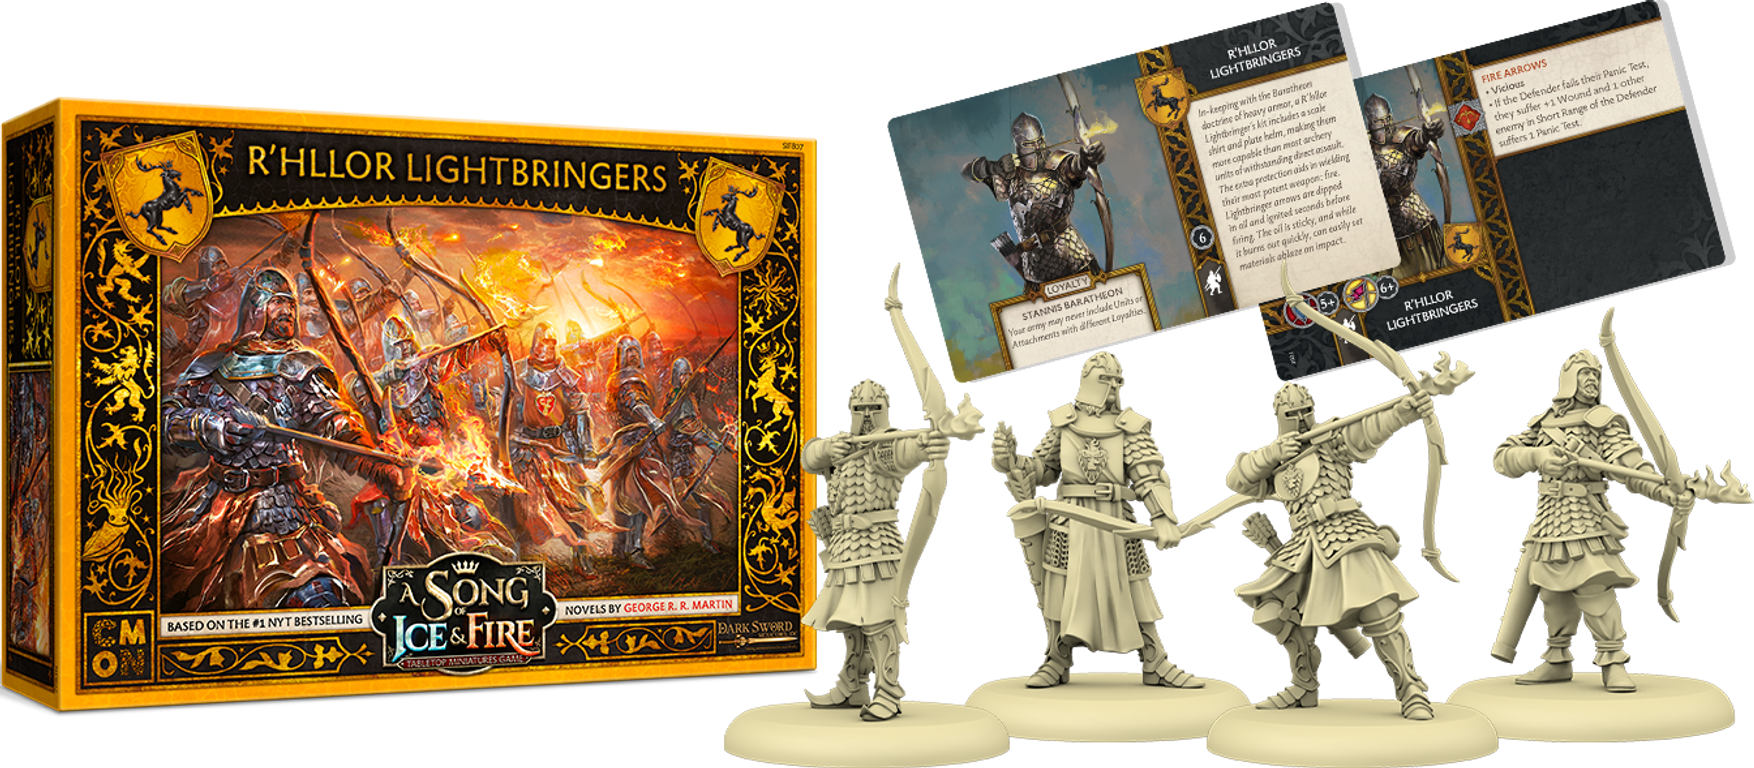 A Song of Ice & Fire: Tabletop Miniatures Game – R'hllor Lightbringers partes